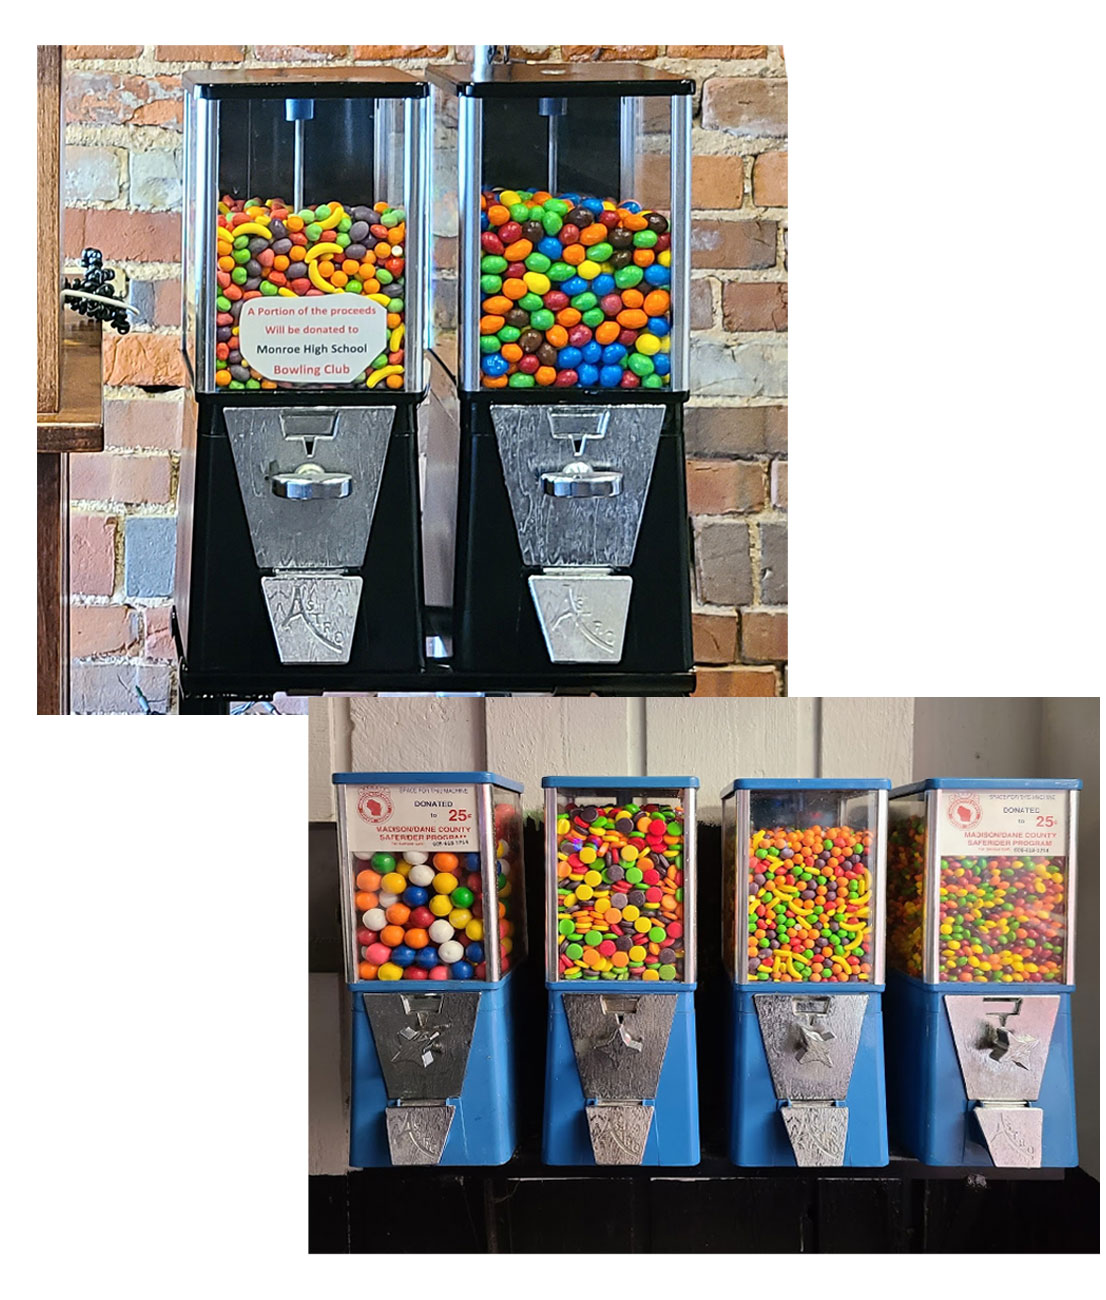 Candy and toy vending machines